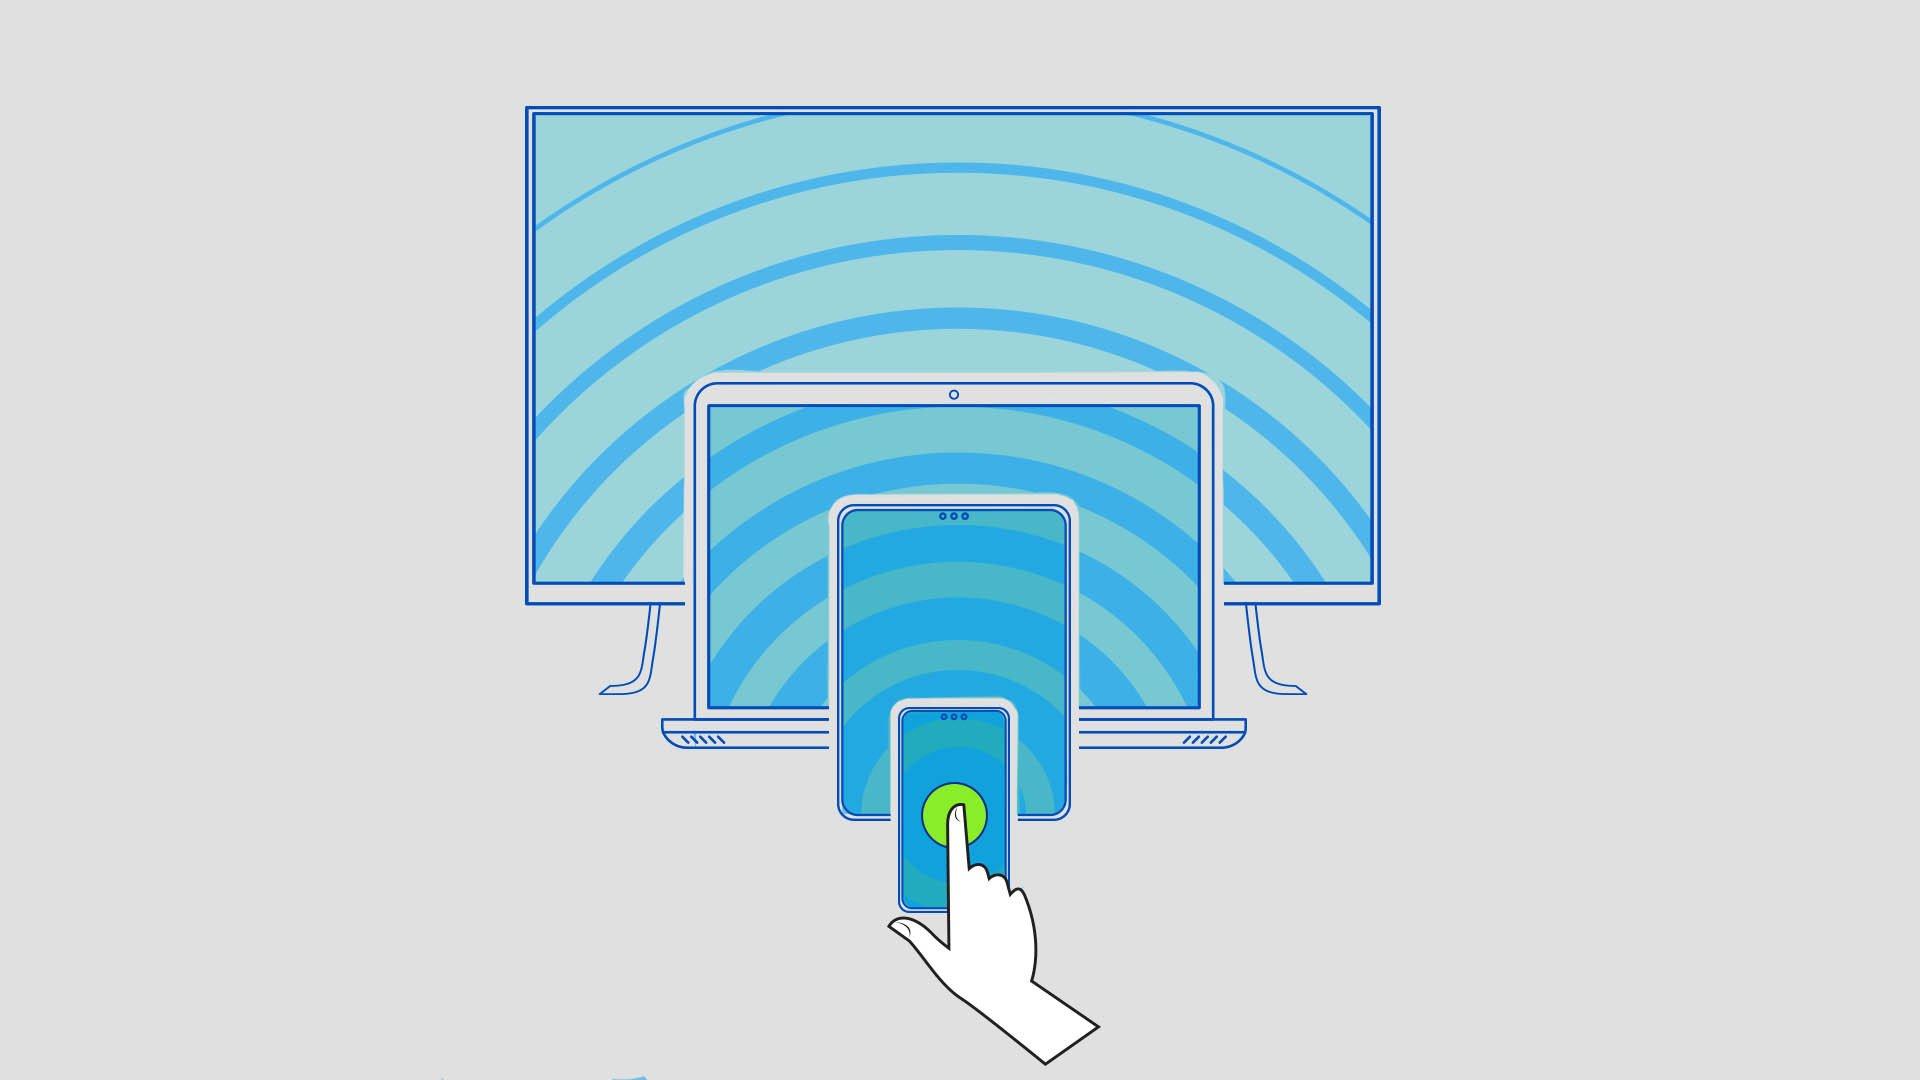 Illustration shows devices lined up behind each other in the order of phone, tablet, laptop and TV,  while a hand taps a green circle on the phone.